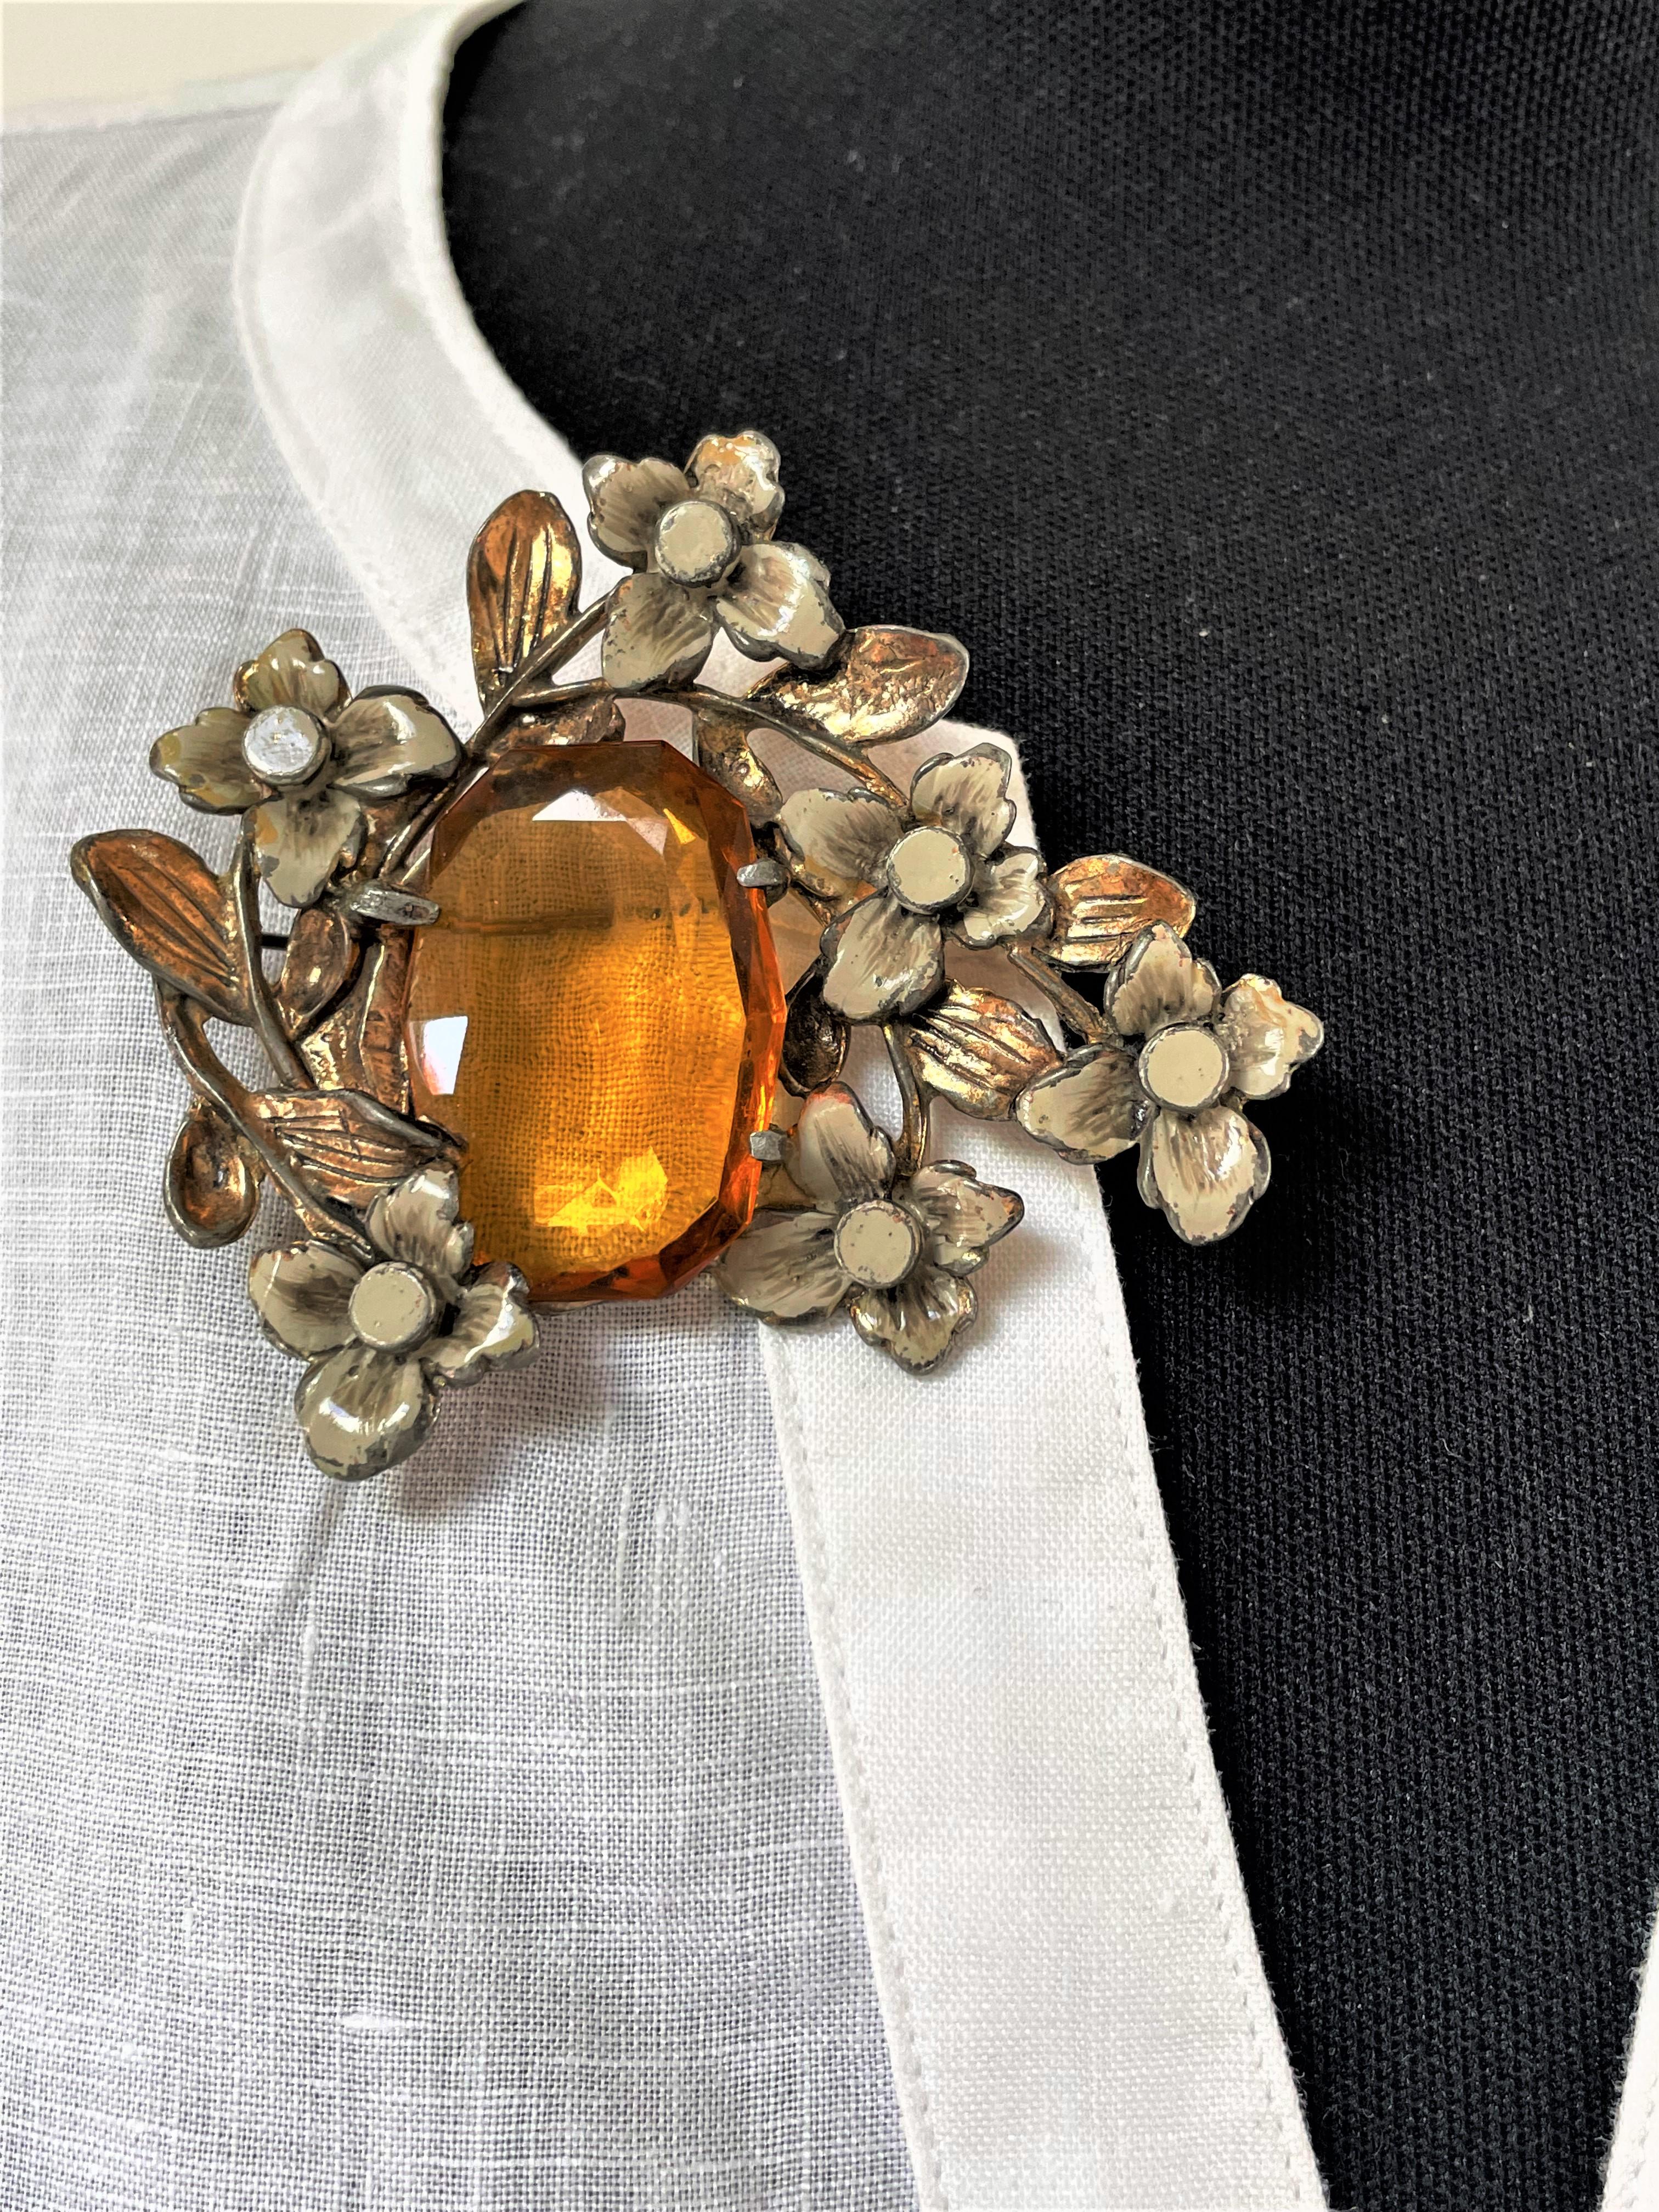 An enchanting vintage brooch from the early 1930/40s in the USA. In the middle is a large rhinestone that is cut on both sides. Bordered with 6 enameled flowers and leaves. A beautiful unit rhinestone stone and gold-colored border.
Measurement: